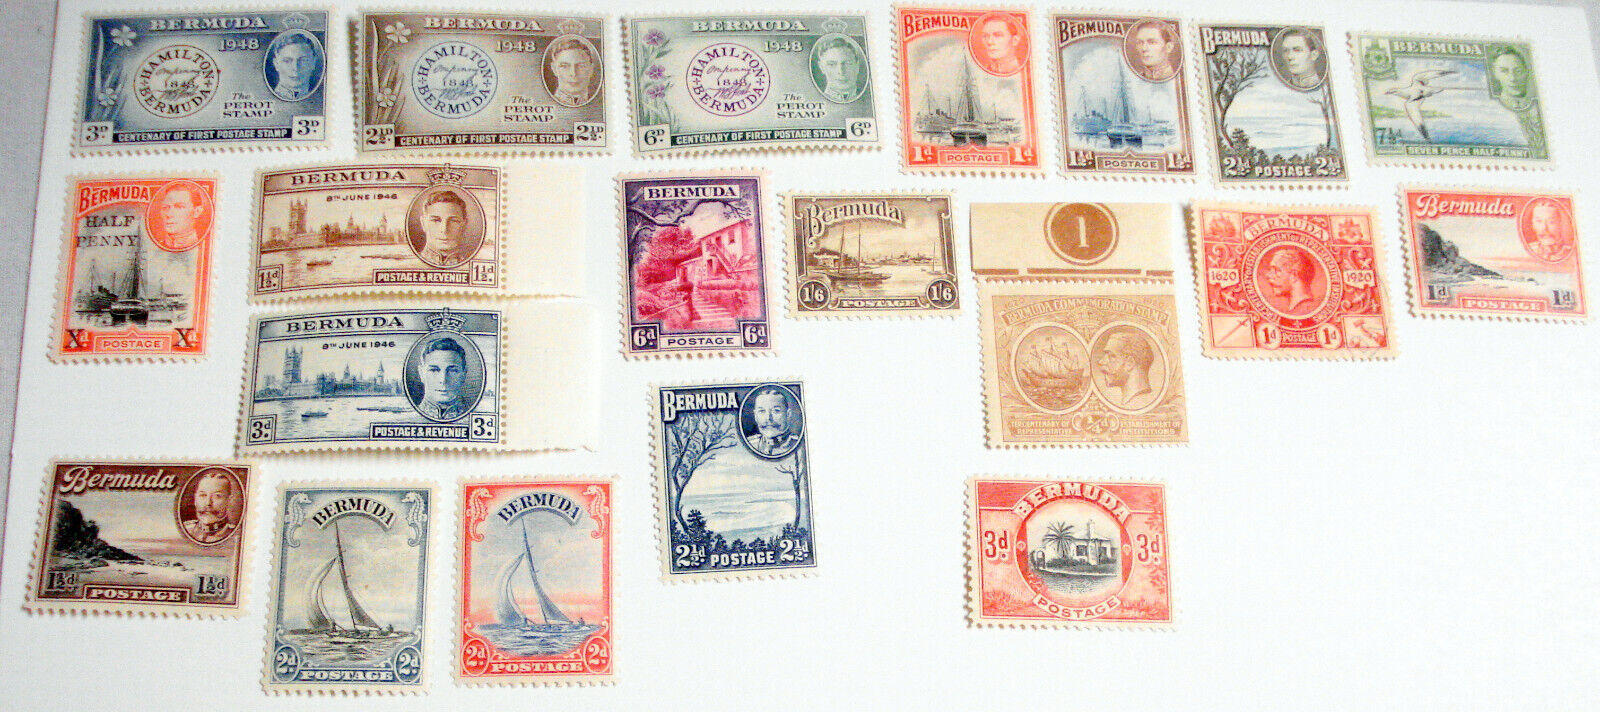 19 Bermuda Mint King George V & VI Stamps Only $19.99 Free Shipping  - $19.99